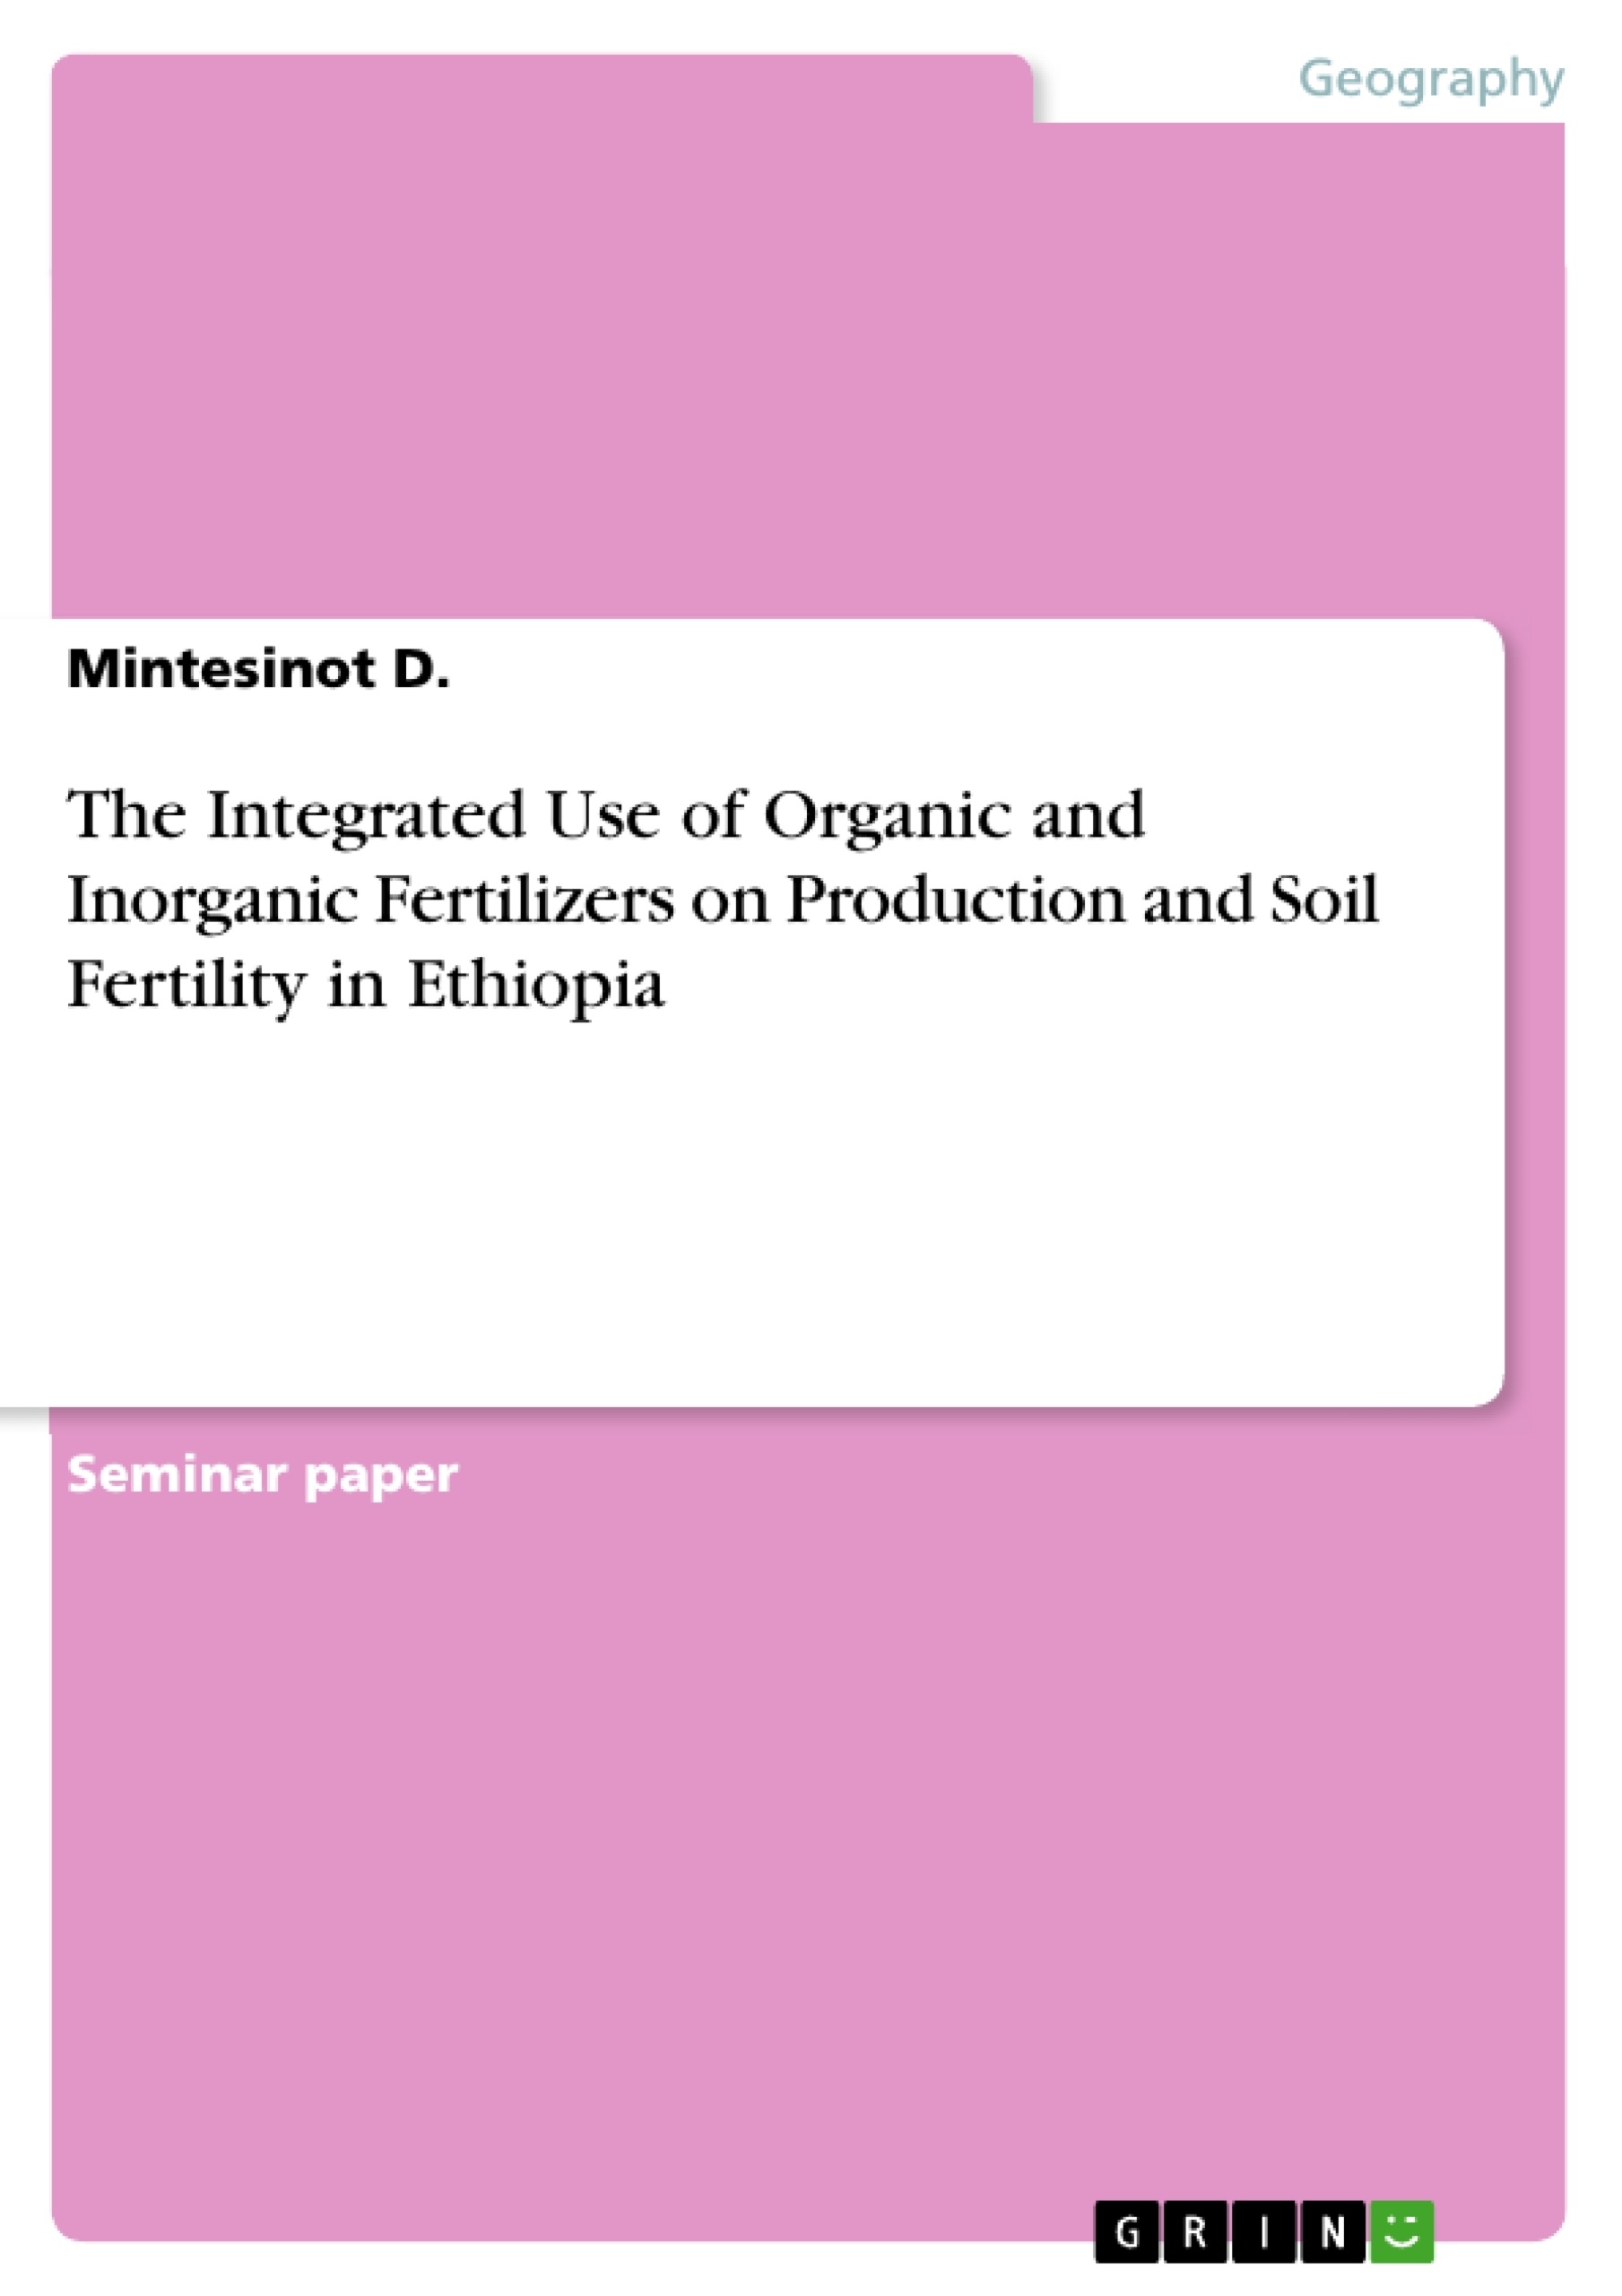 Title: The Integrated Use of Organic and Inorganic Fertilizers on Production and Soil Fertility in Ethiopia